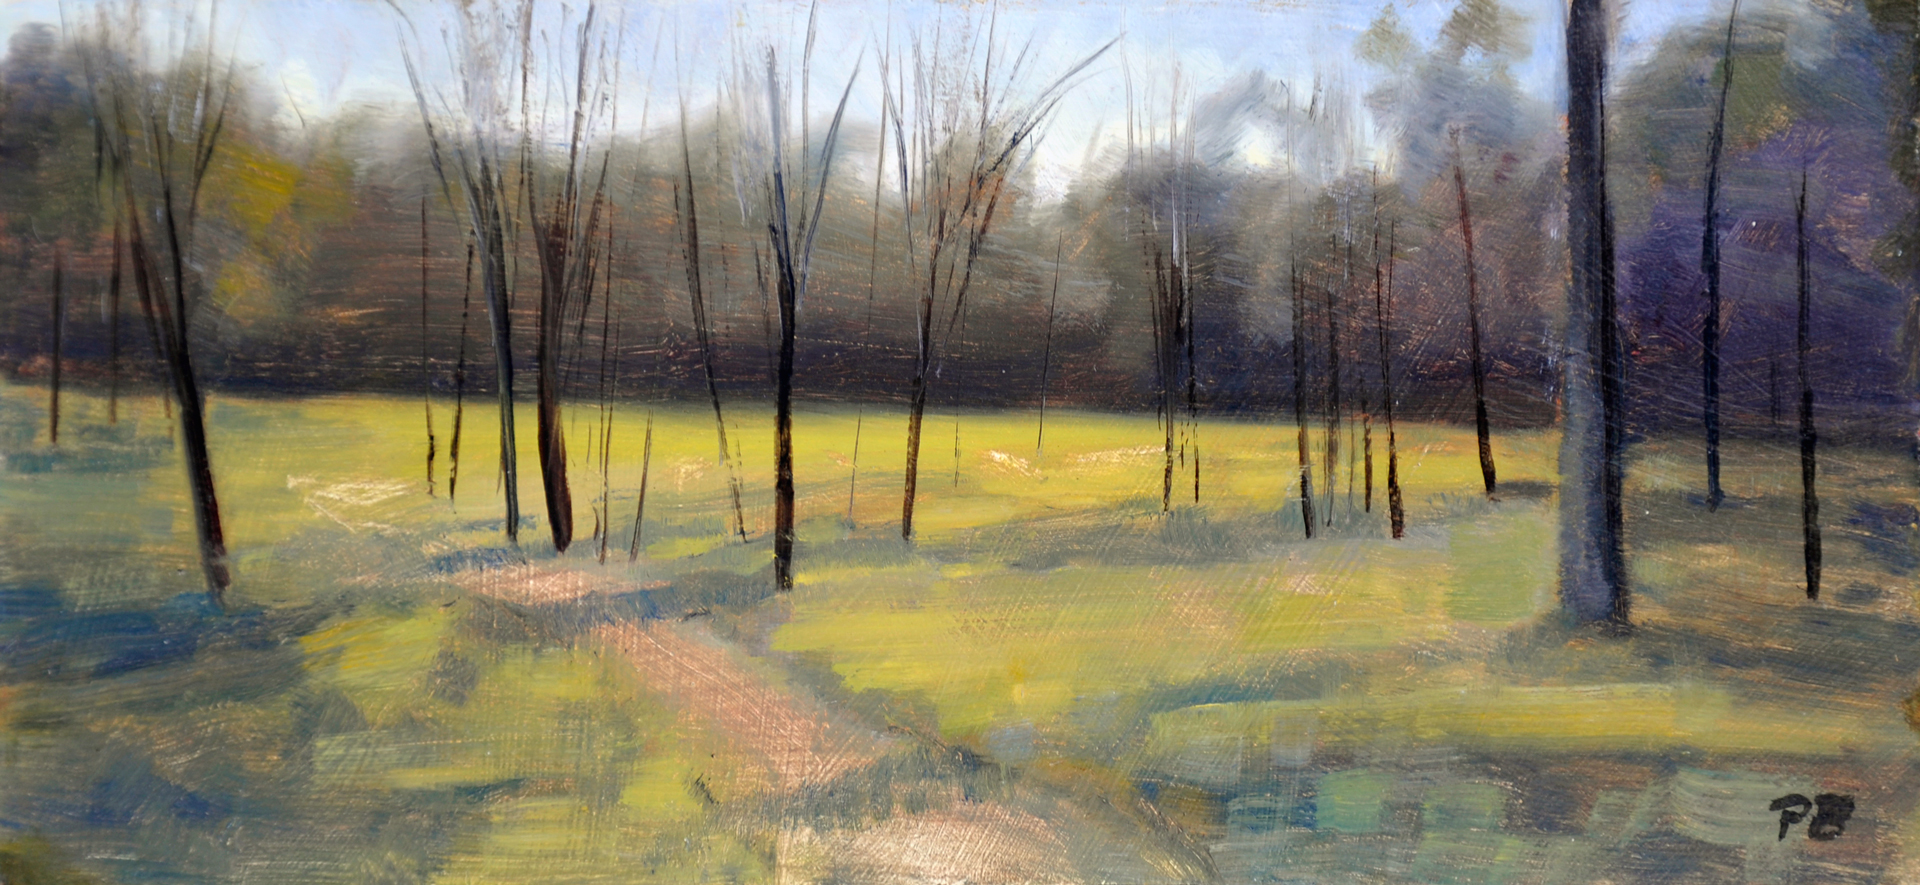 10. Peter Barker, Forest path $310